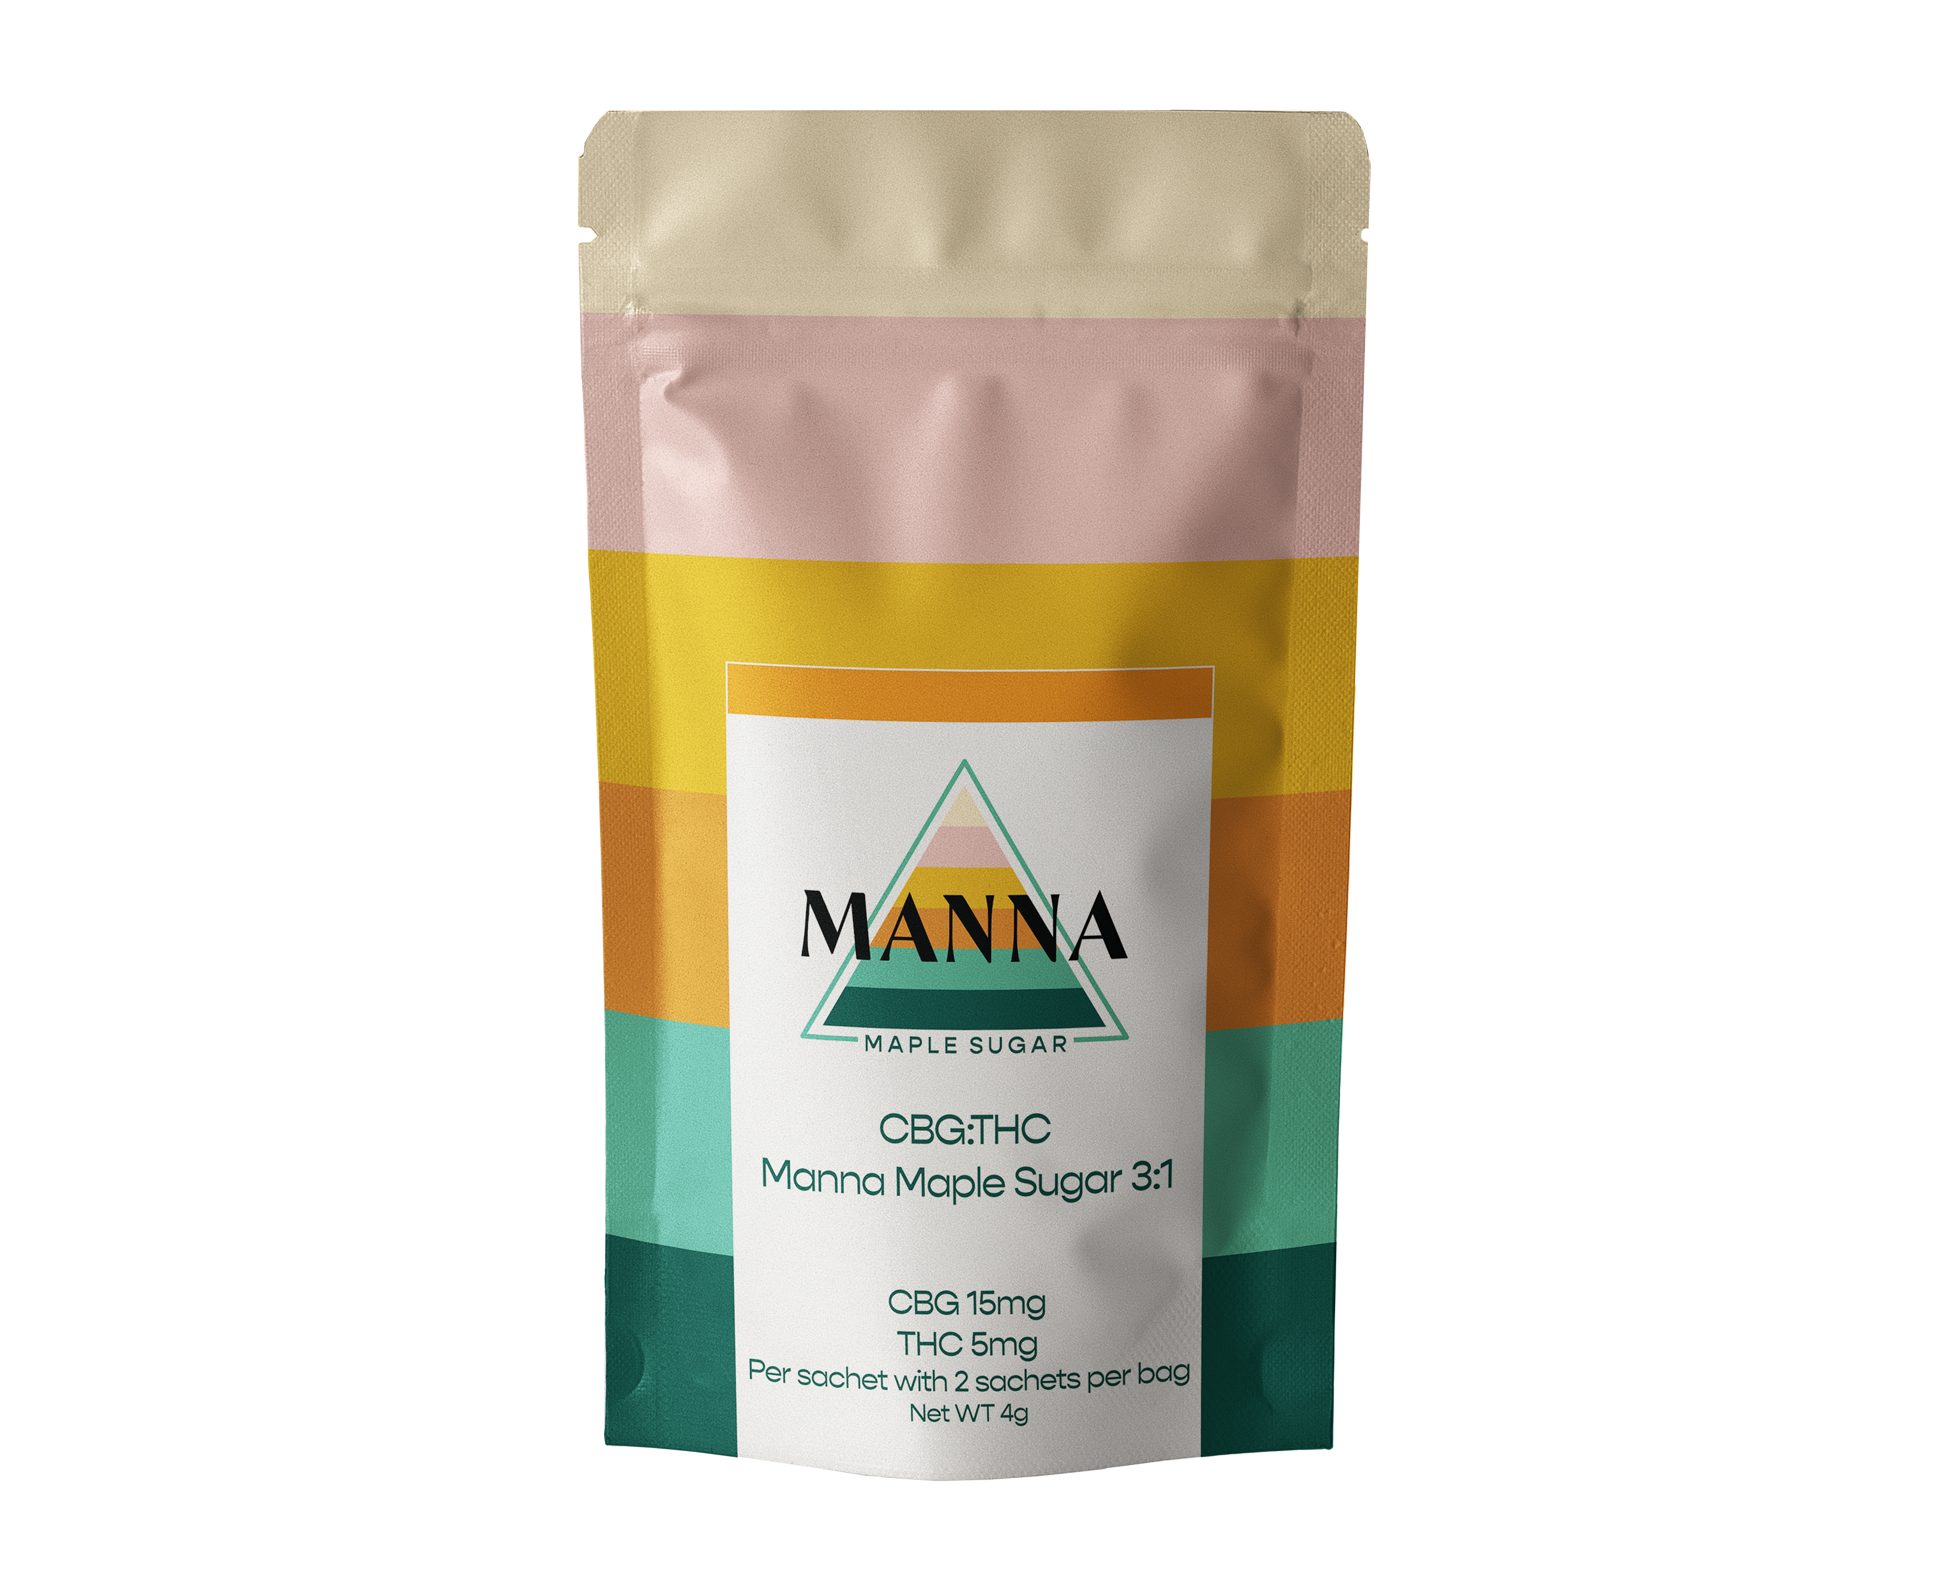 Elevate naturally with 5:1 Manna Maple Sugar